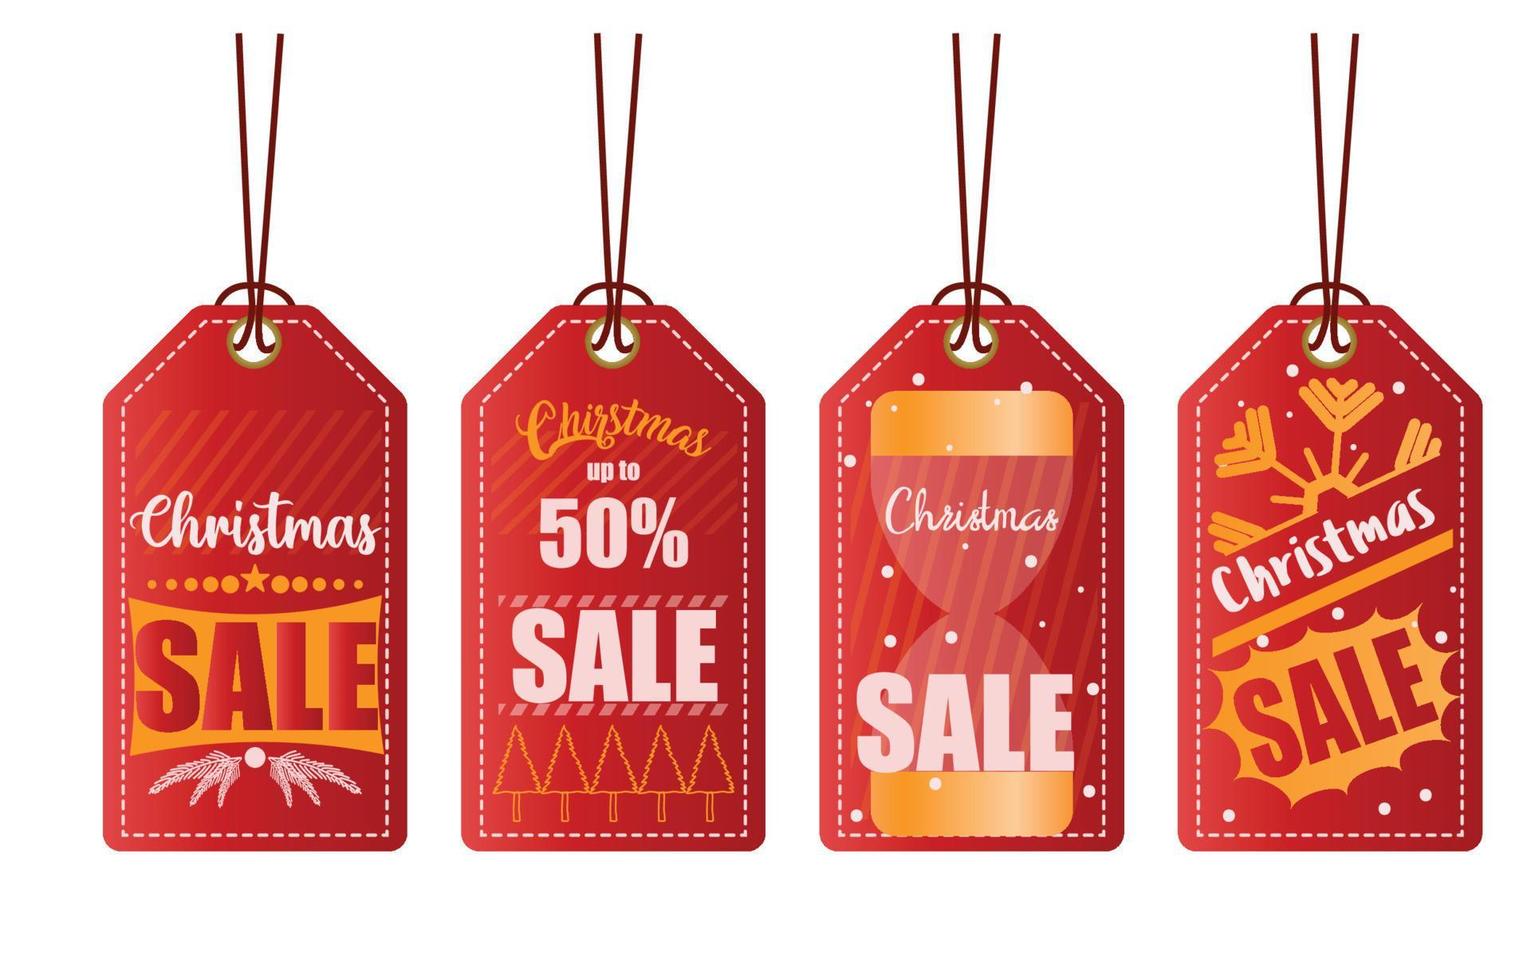 christmas red paper sale price tag. red and golden square label and snow hand drawn elements, hanging with discount text for new year shopping holiday promotion Vector illustration.